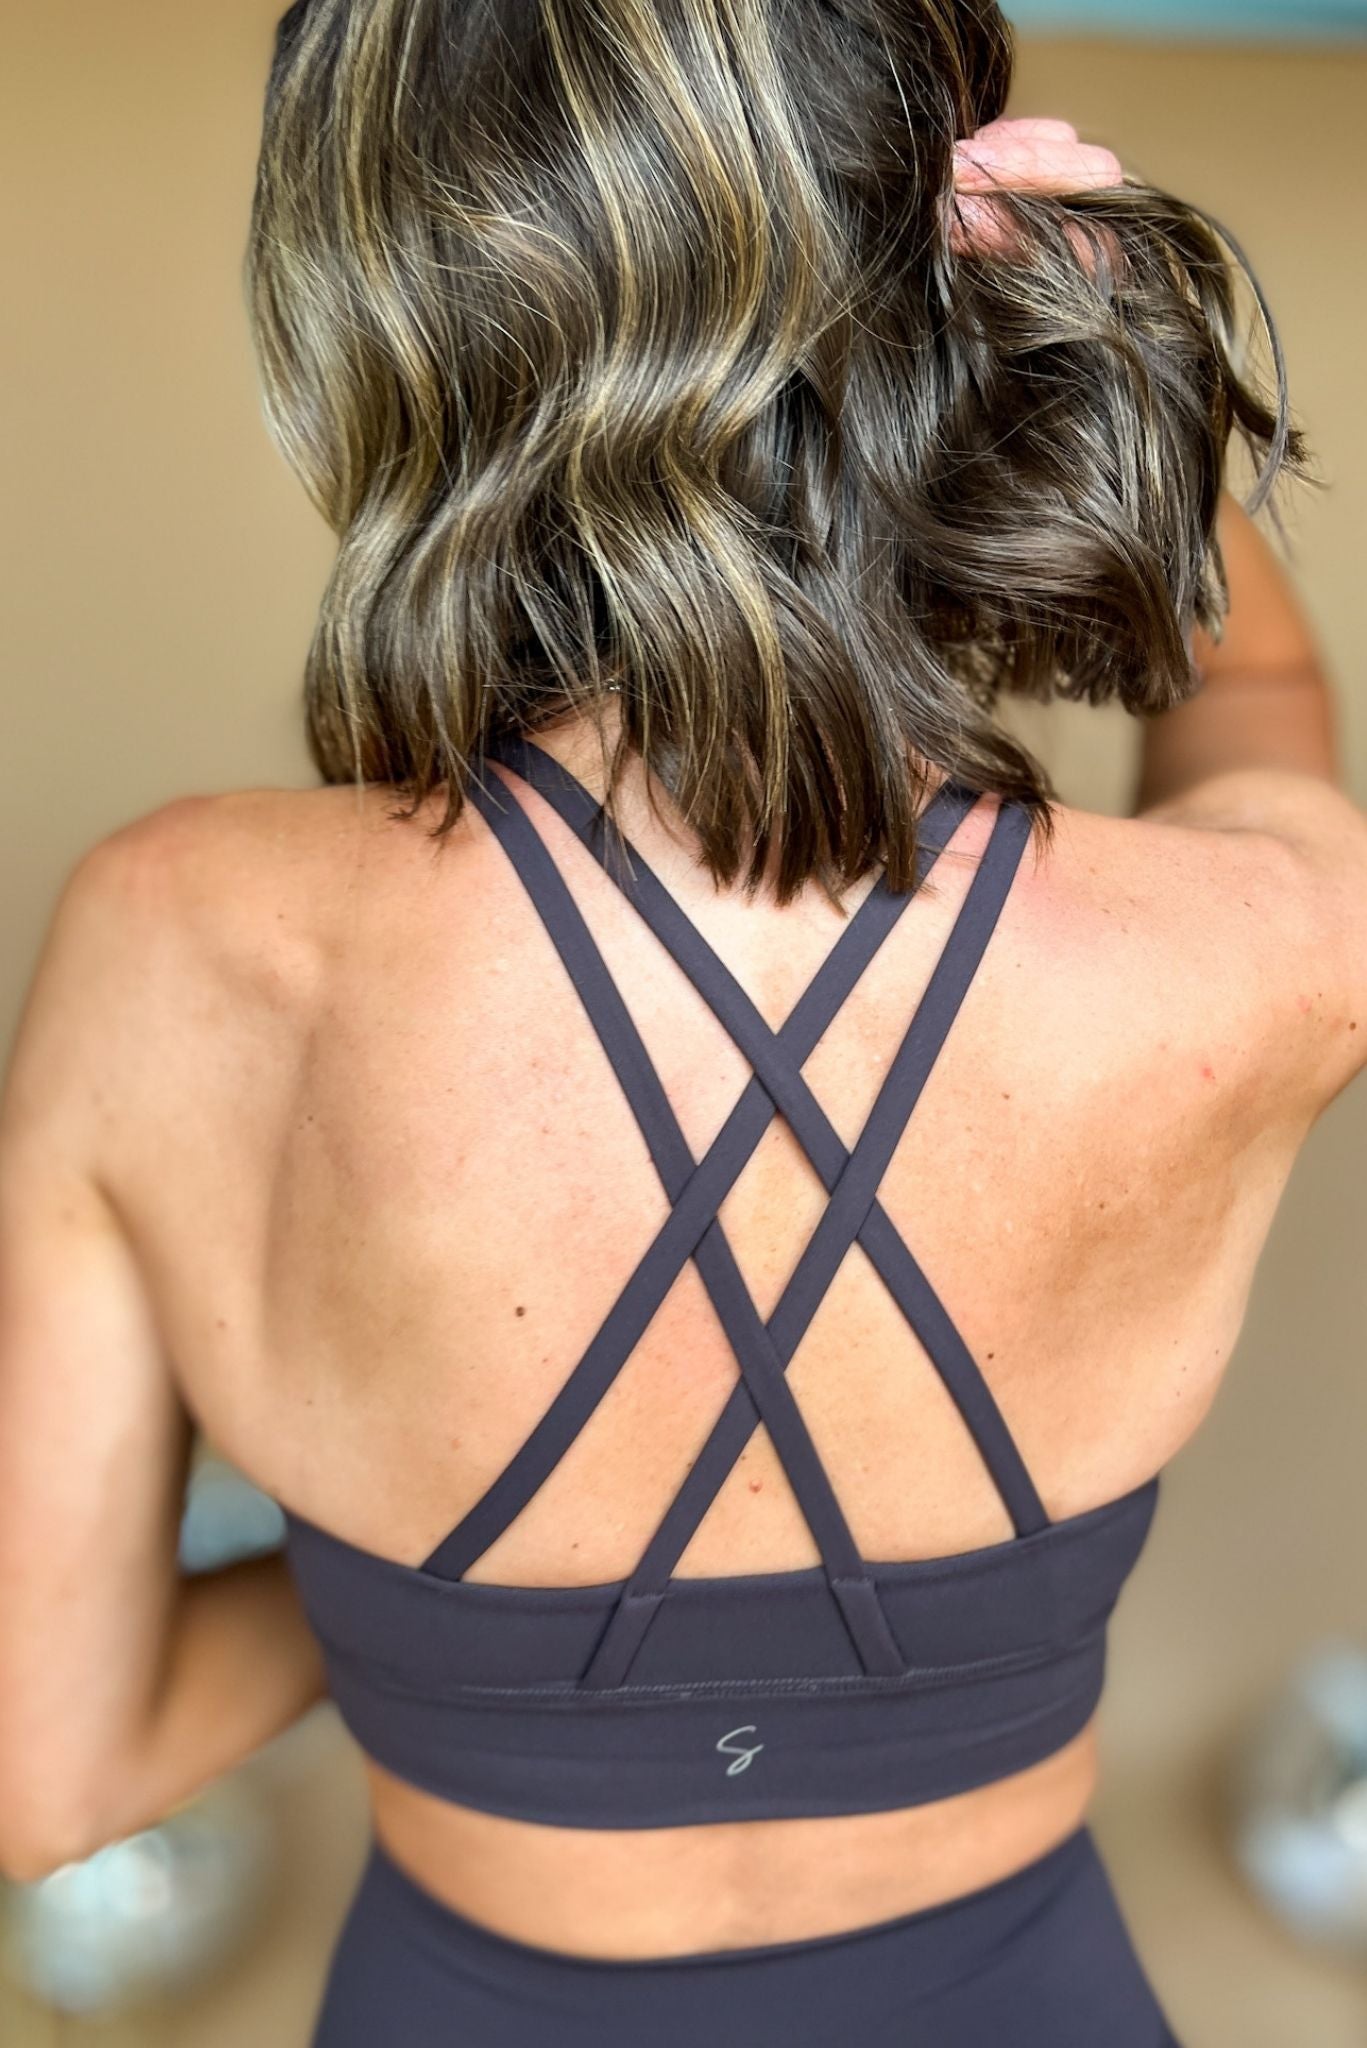 Carbon Grey Criss Cross Back Longline Sports Bra, athleisure, must have, mom style, chic, everyday wear, shop style your senses by mallory ftizsimmons